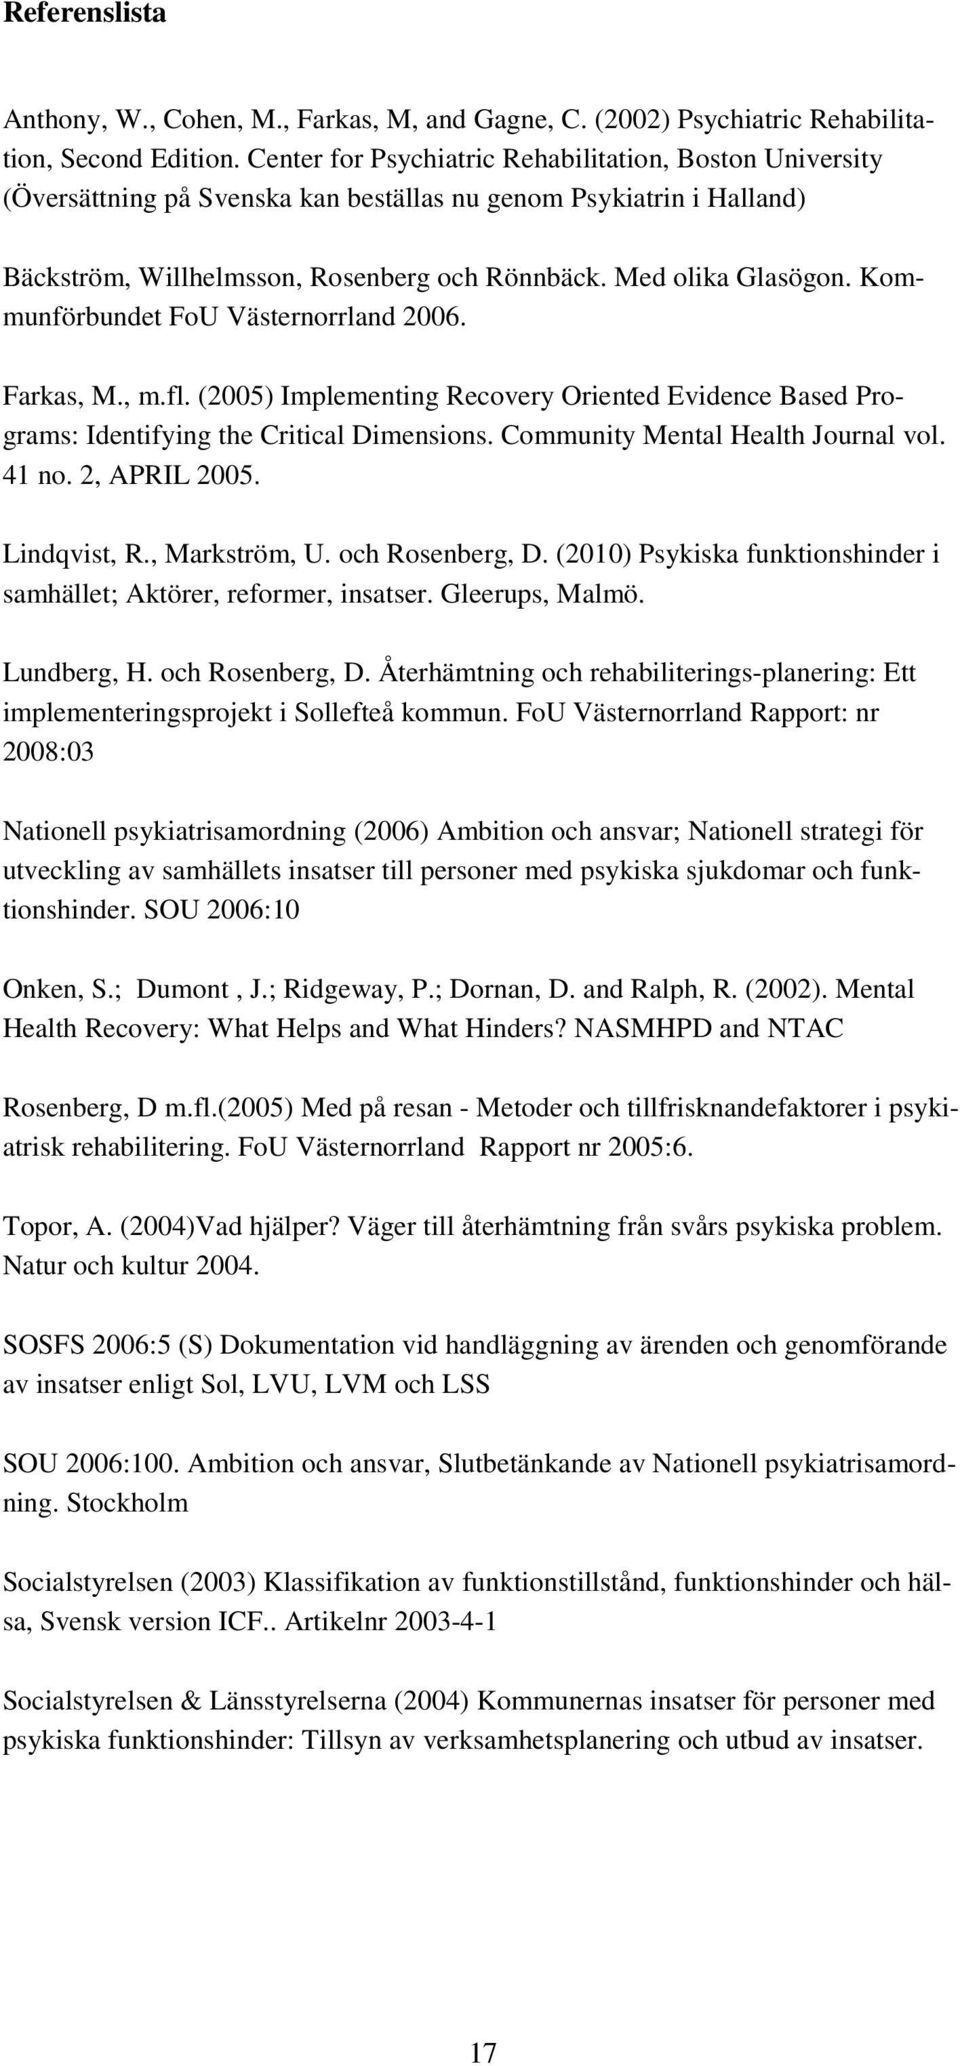 Kommunförbundet FoU Västernorrland 2006. Farkas, M., m.fl. (2005) Implementing Recovery Oriented Evidence Based Programs: Identifying the Critical Dimensions. Community Mental Health Journal vol.